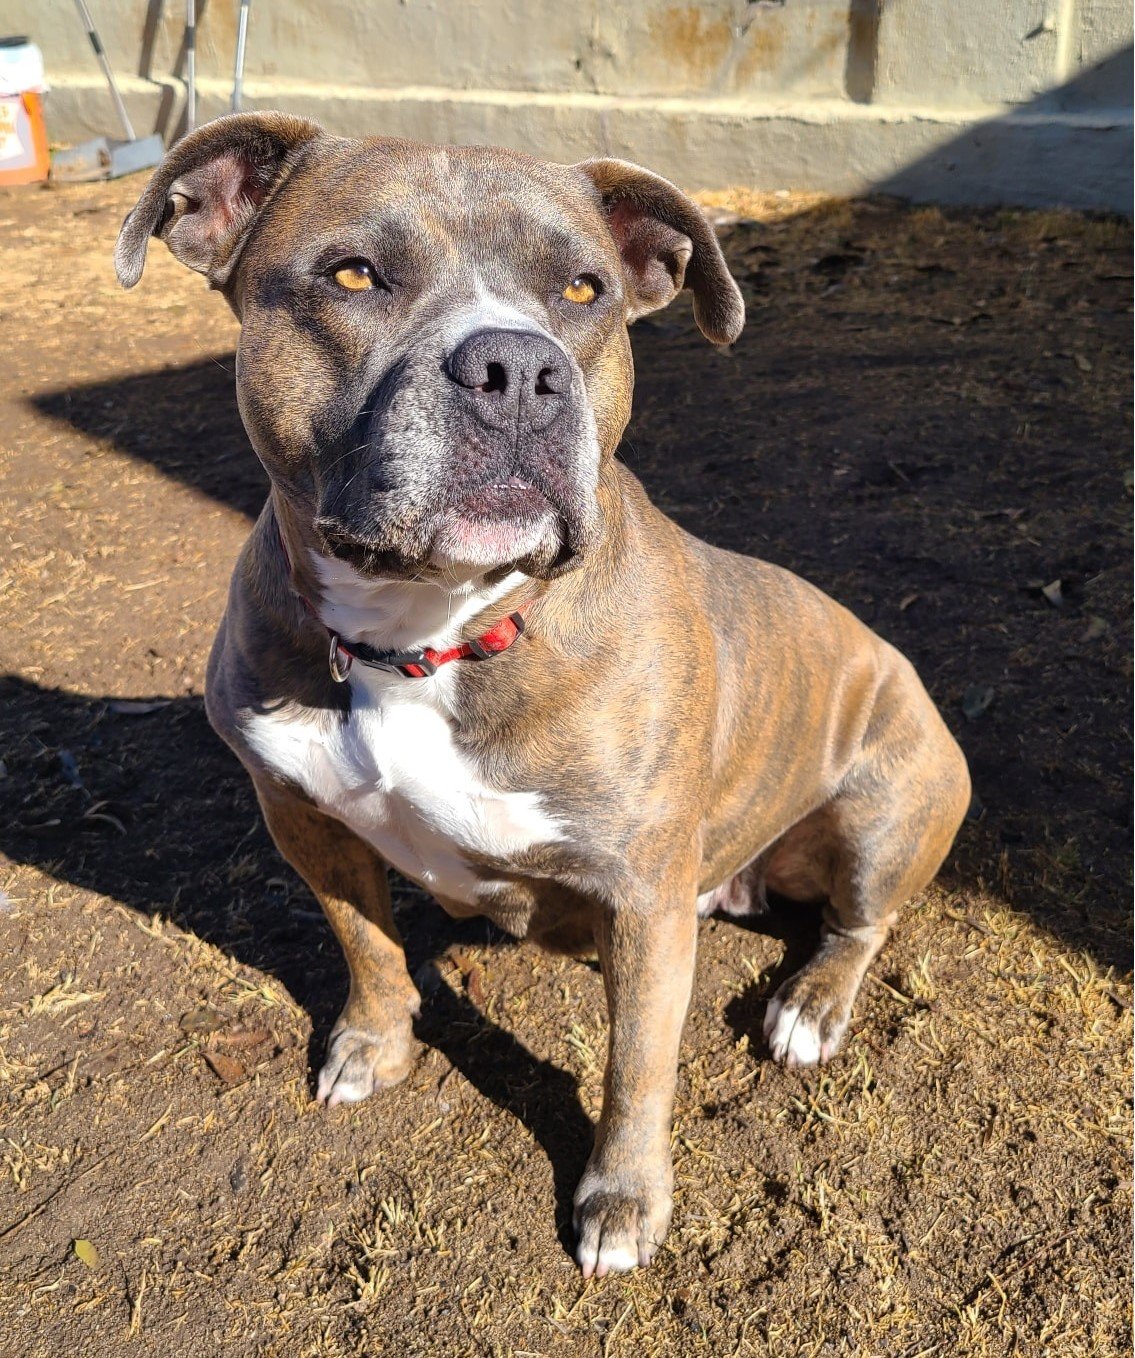 A graduate of ACTion Programs for Animals’ (APA) Prisoners and Animals Working Toward Success (P.A.W.S.) training program, Hazel is available for adoption.